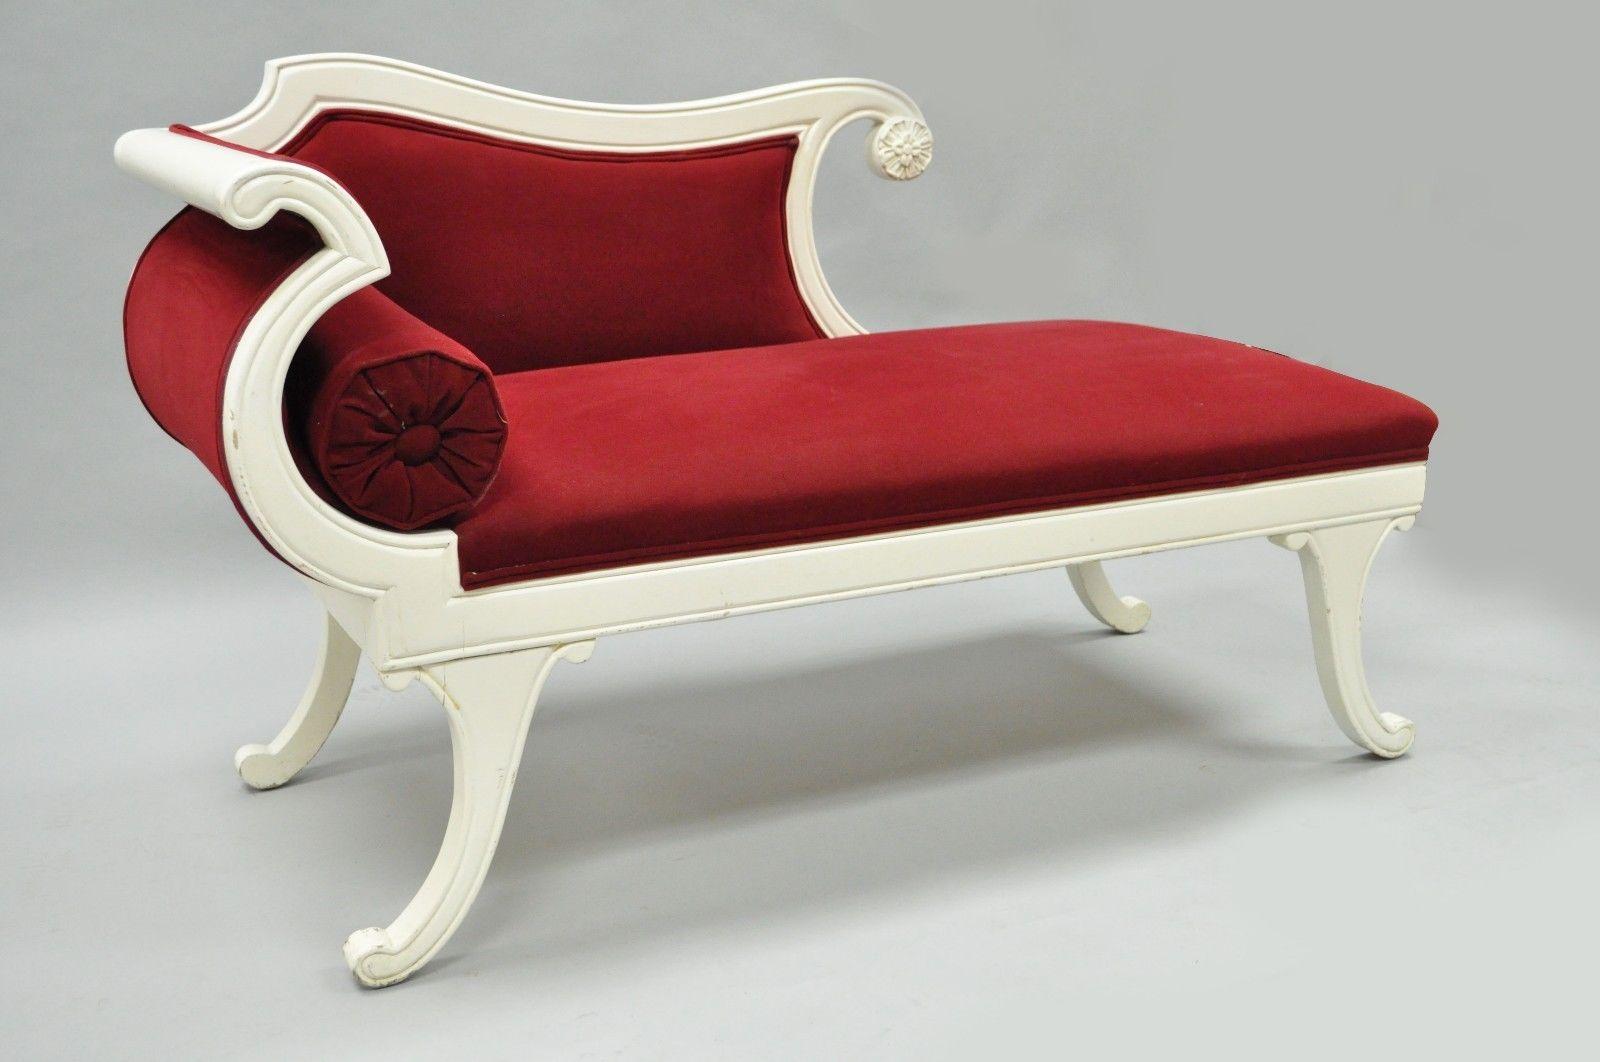 Small Vintage French Empire Style Carved Wood chaise longue. Great for use as a child's chaise longue or unique decorative item. Item features Solid Carved Wood Frame, Plush Red Upholstery, White painted Finish, Round Loose Pillow, Very Elegant